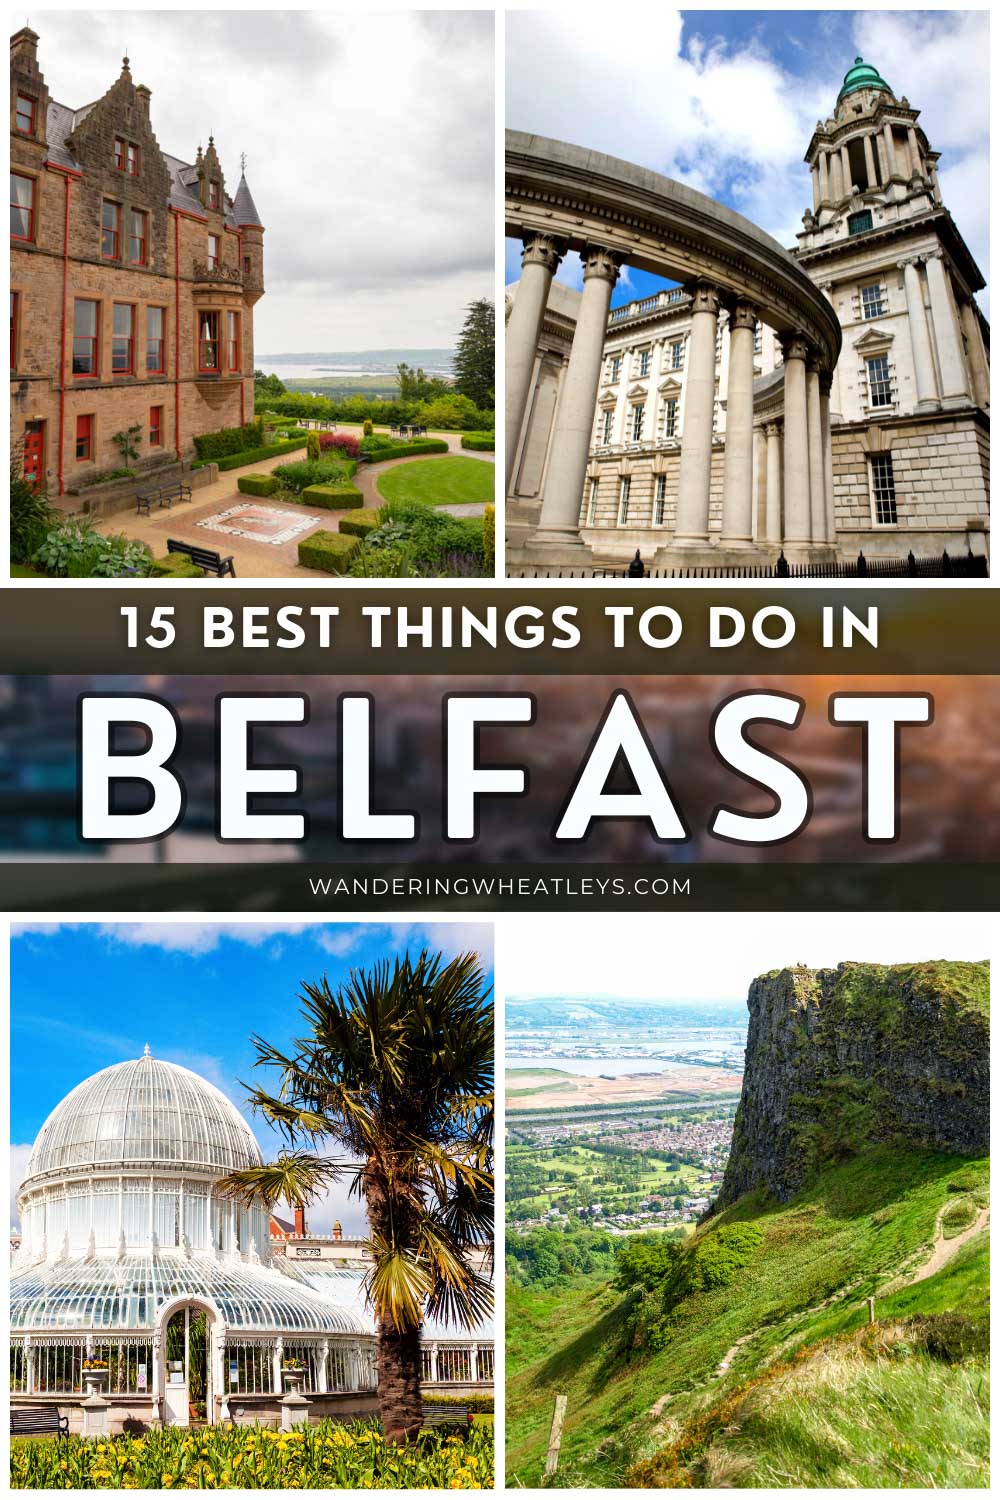 The Best Things to do in Belfast